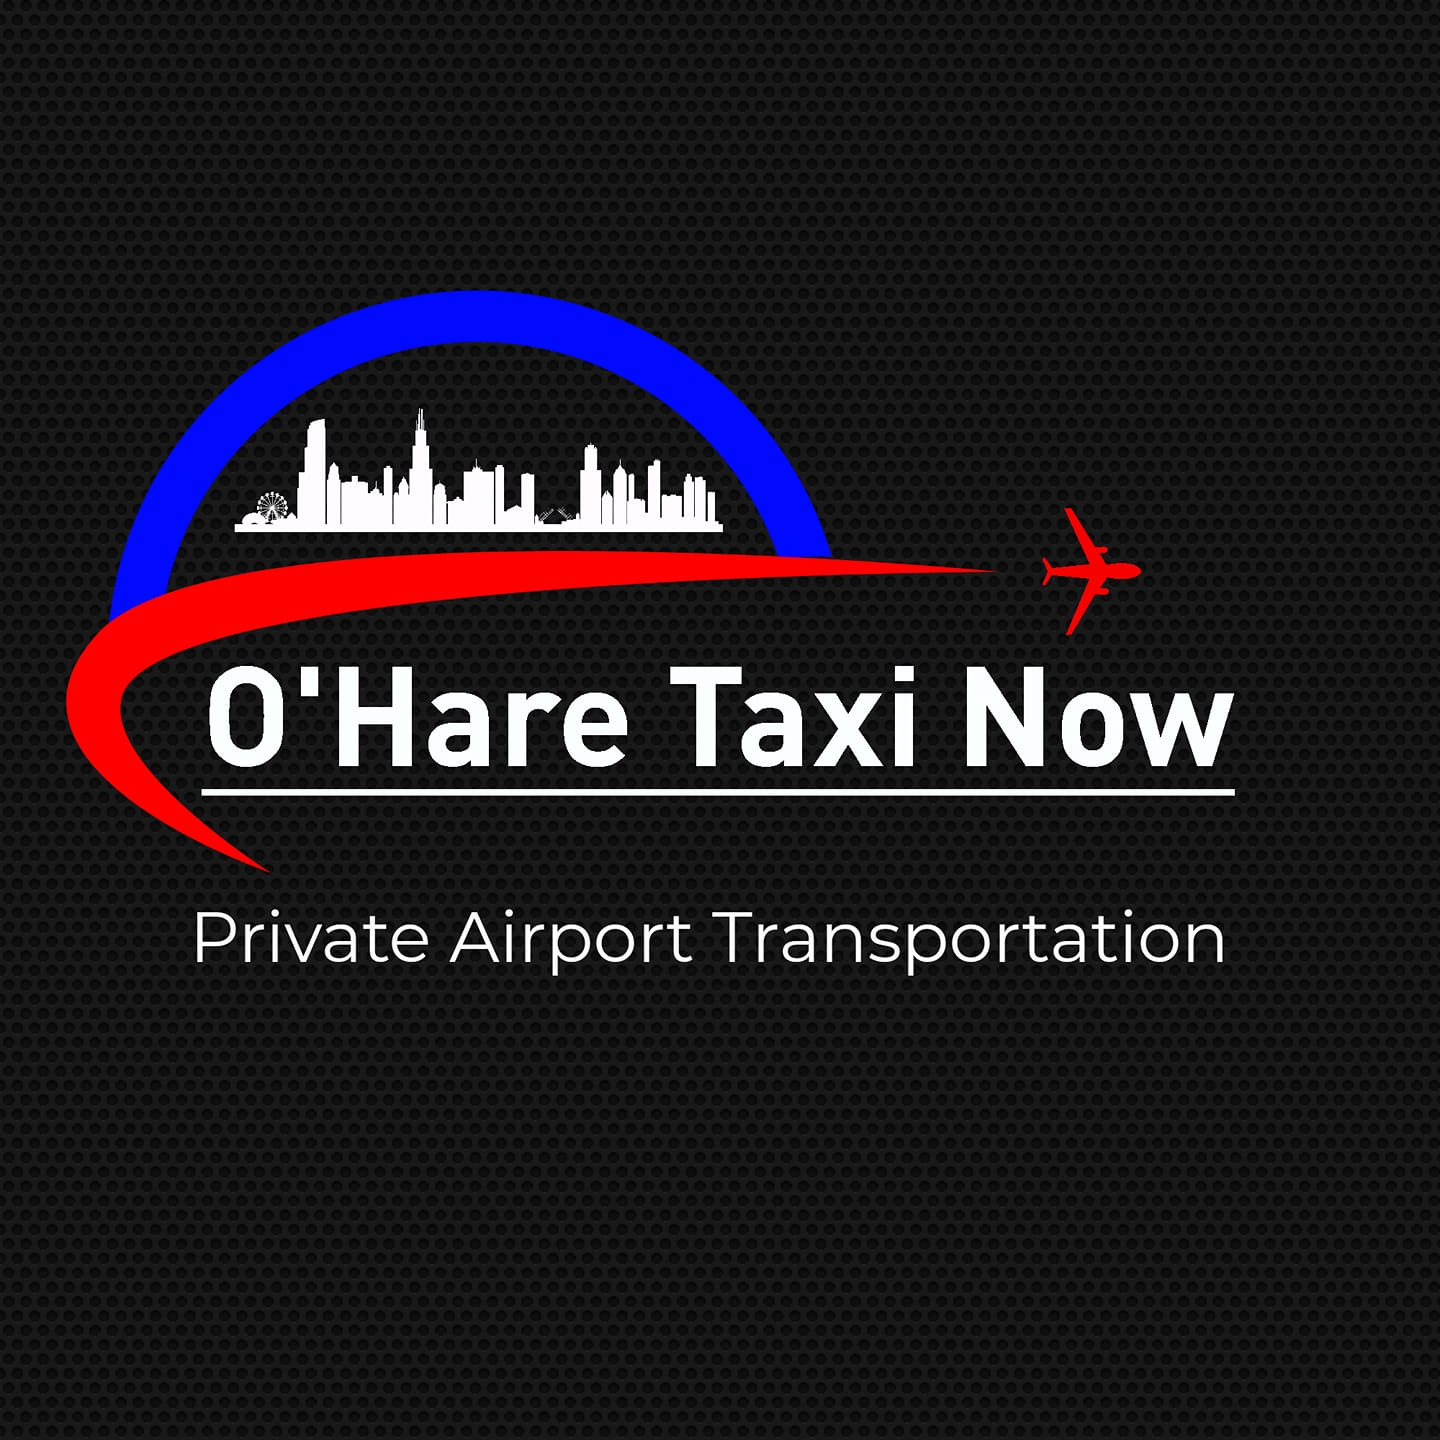 Business logo of American O'Hare Taxi